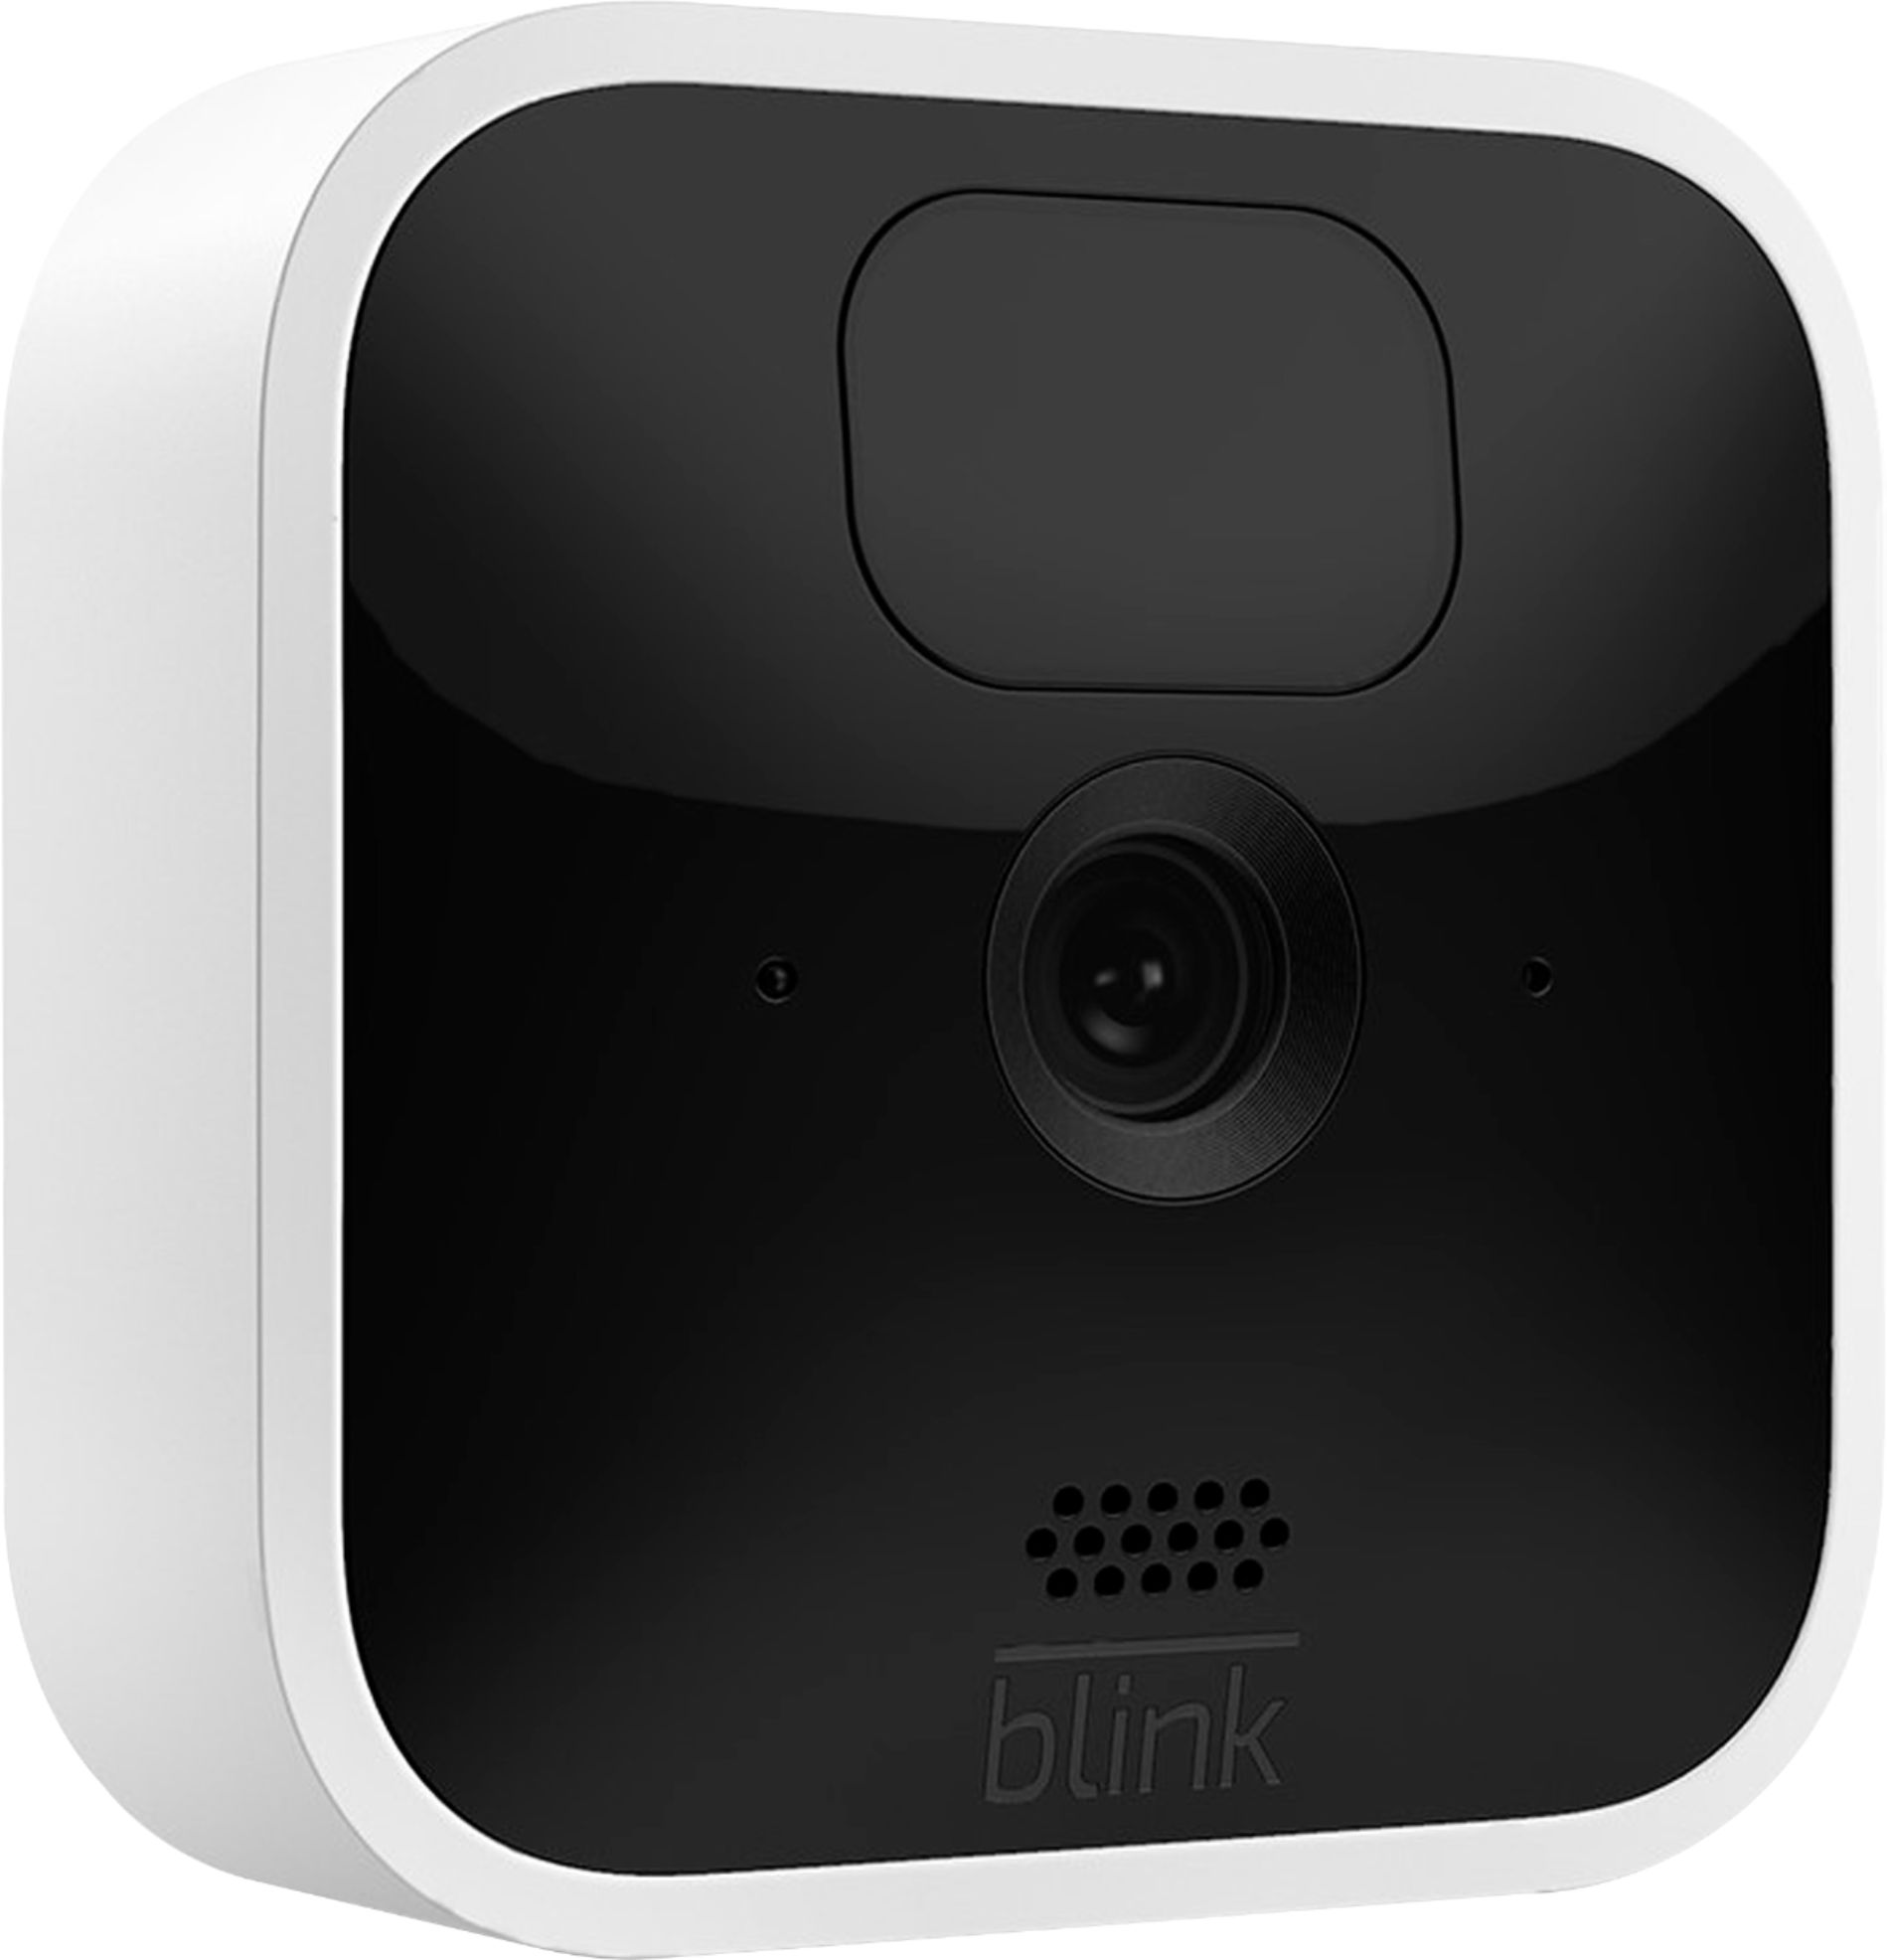 Blink Indoor (3rd Gen) wireless, HD security camera with two-year battery  life, motion detection, and two-way audio 2 camera system 2 Camera System  Blink Indoor